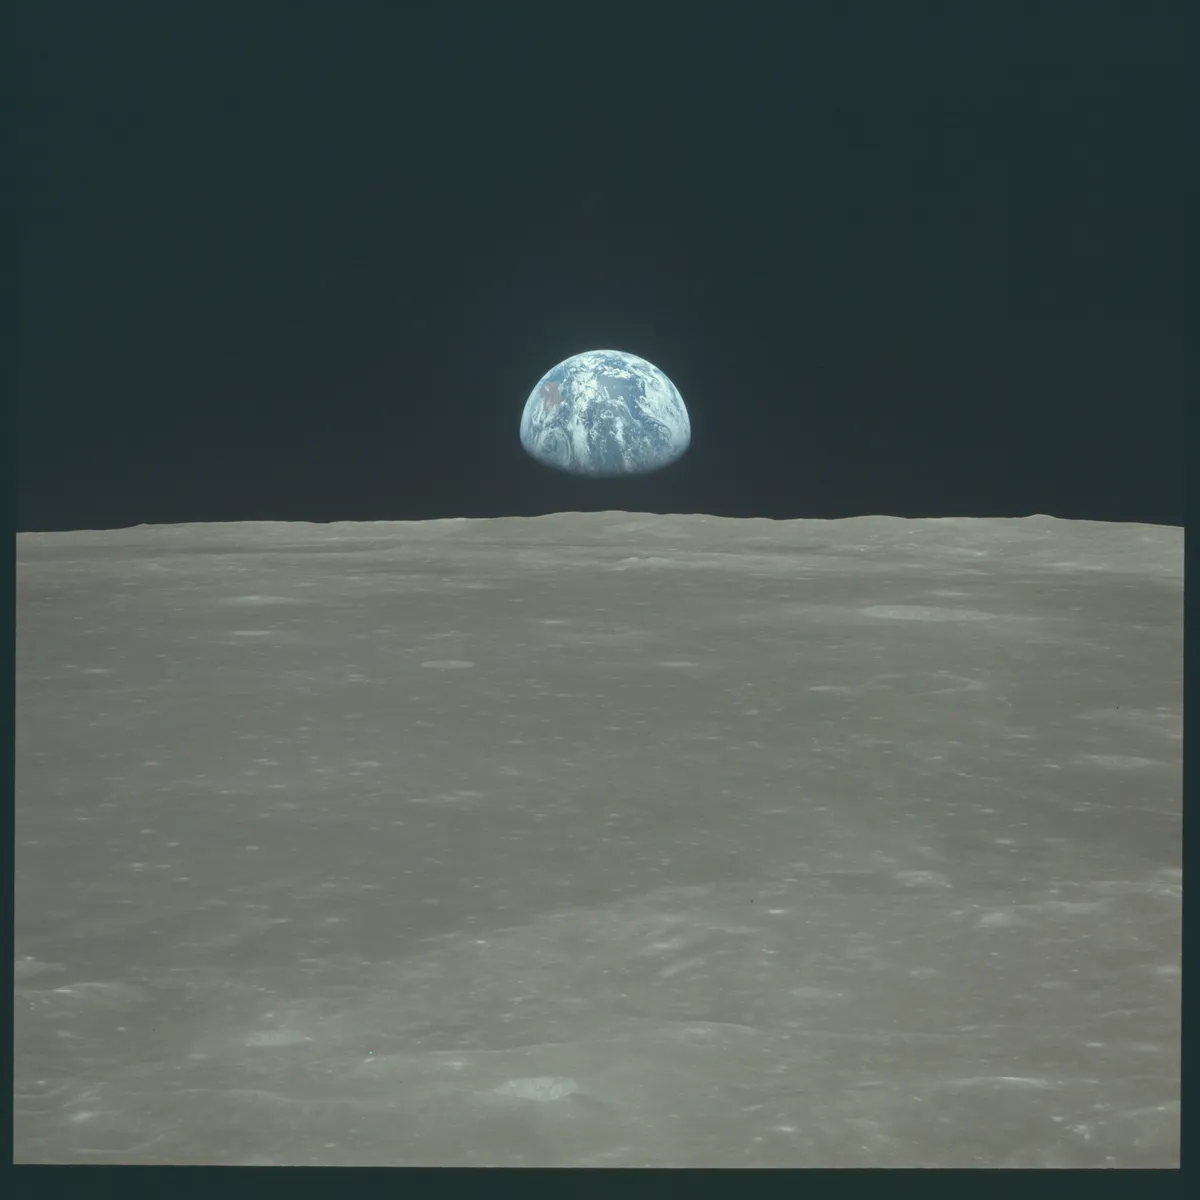 AS11-44-6550 - Apollo 11 Hasselblad image from film magazine 44/V - LM inspection, rendezvous